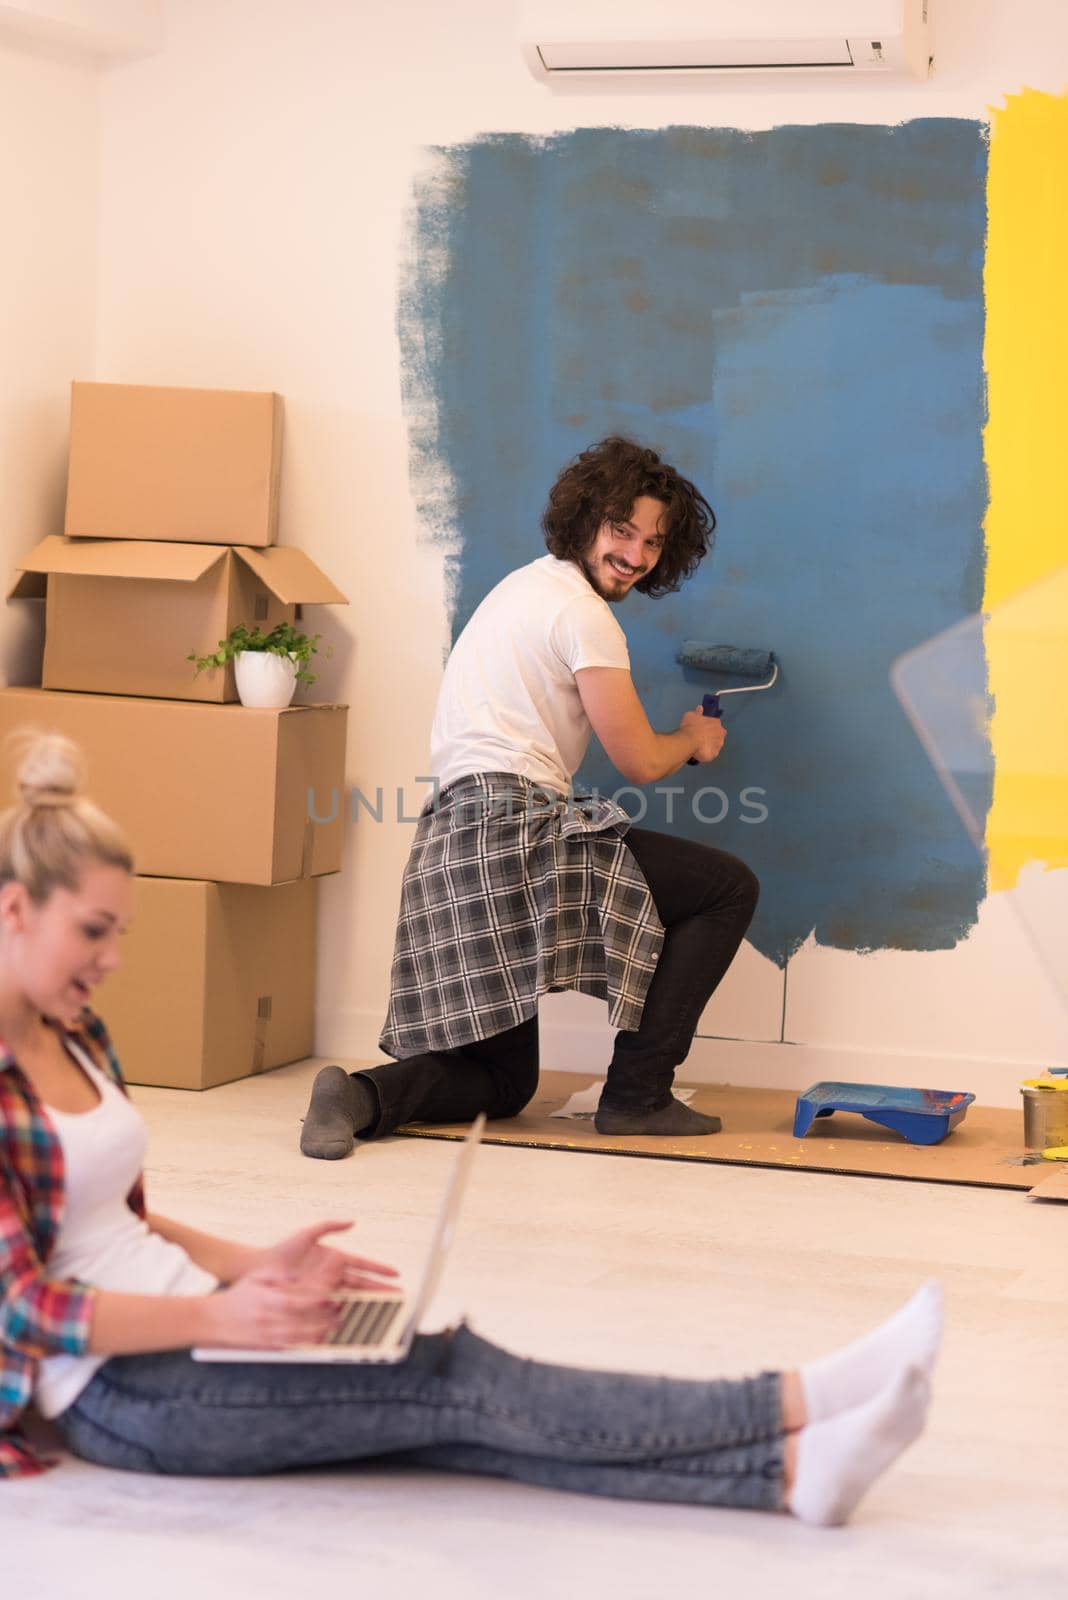 Happy couple doing home renovations, the man is painting the room and the woman is relaxing on the floor and connecting with a laptop